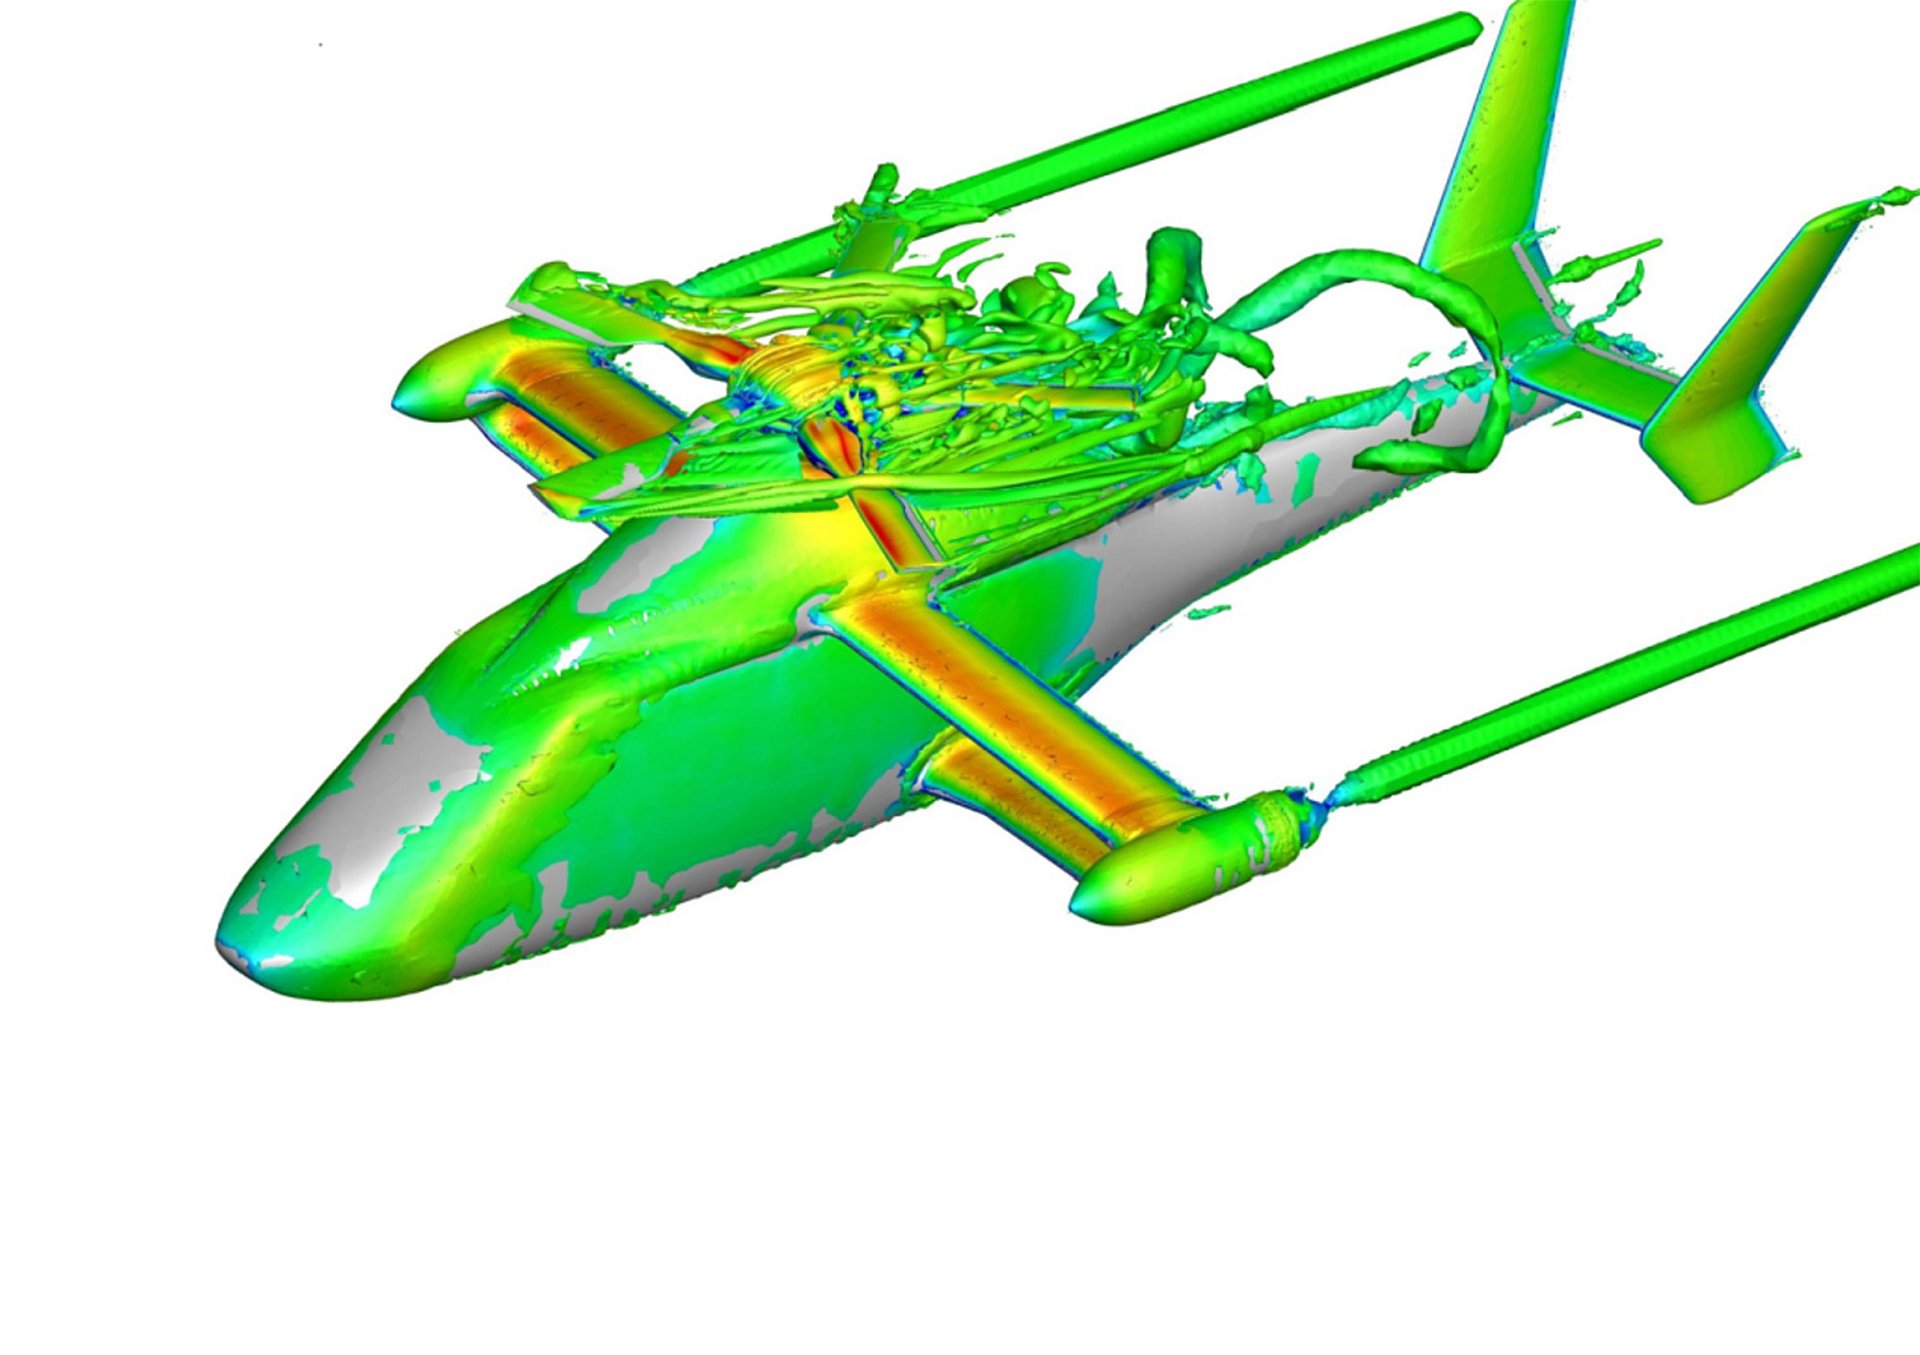 Visualization of turbulent structures in the vicinity of the rotor head.